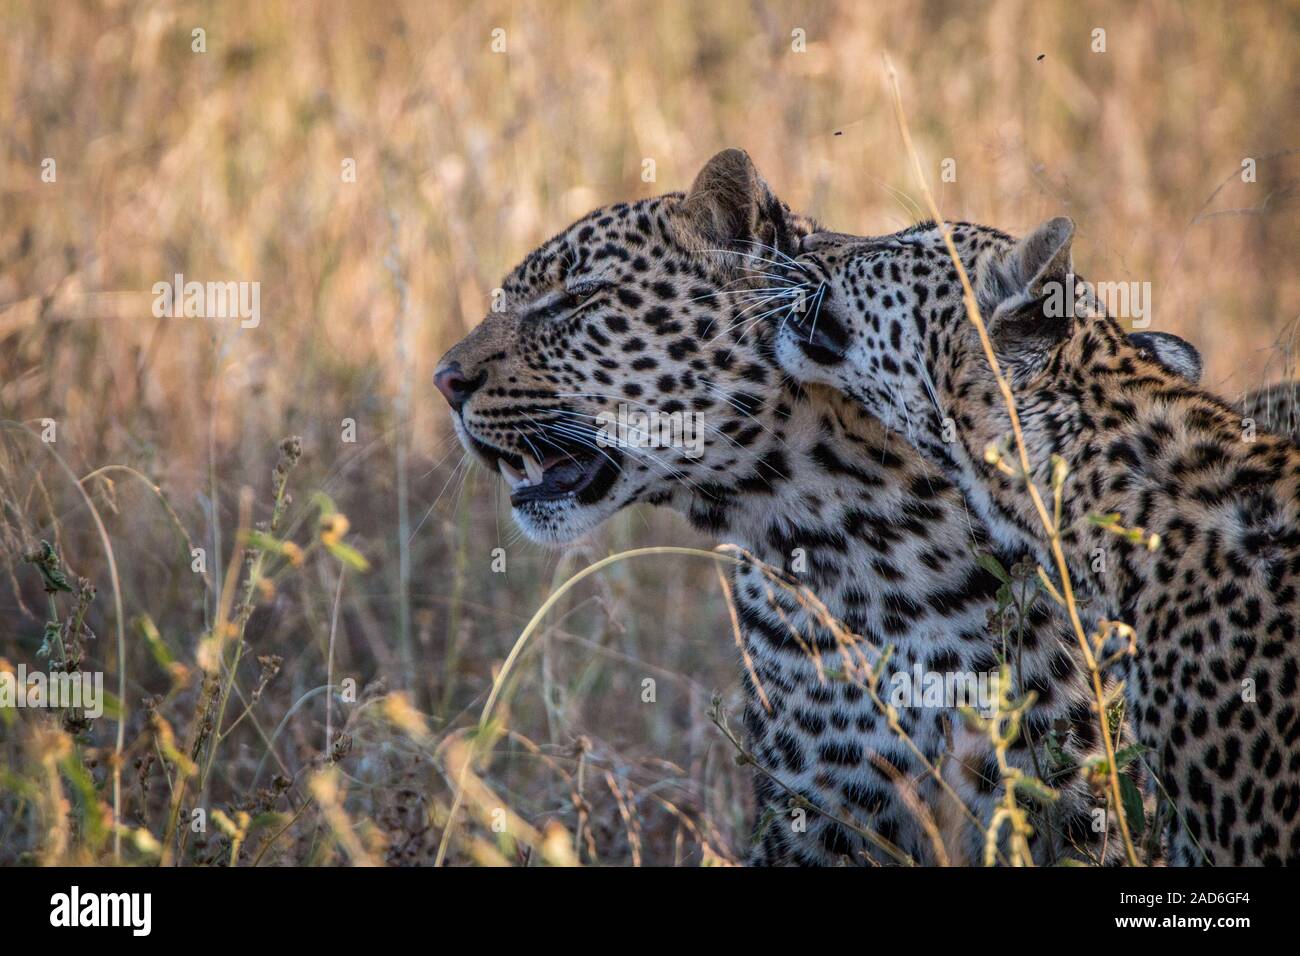 Two Leopards bonding in the grass. Stock Photo